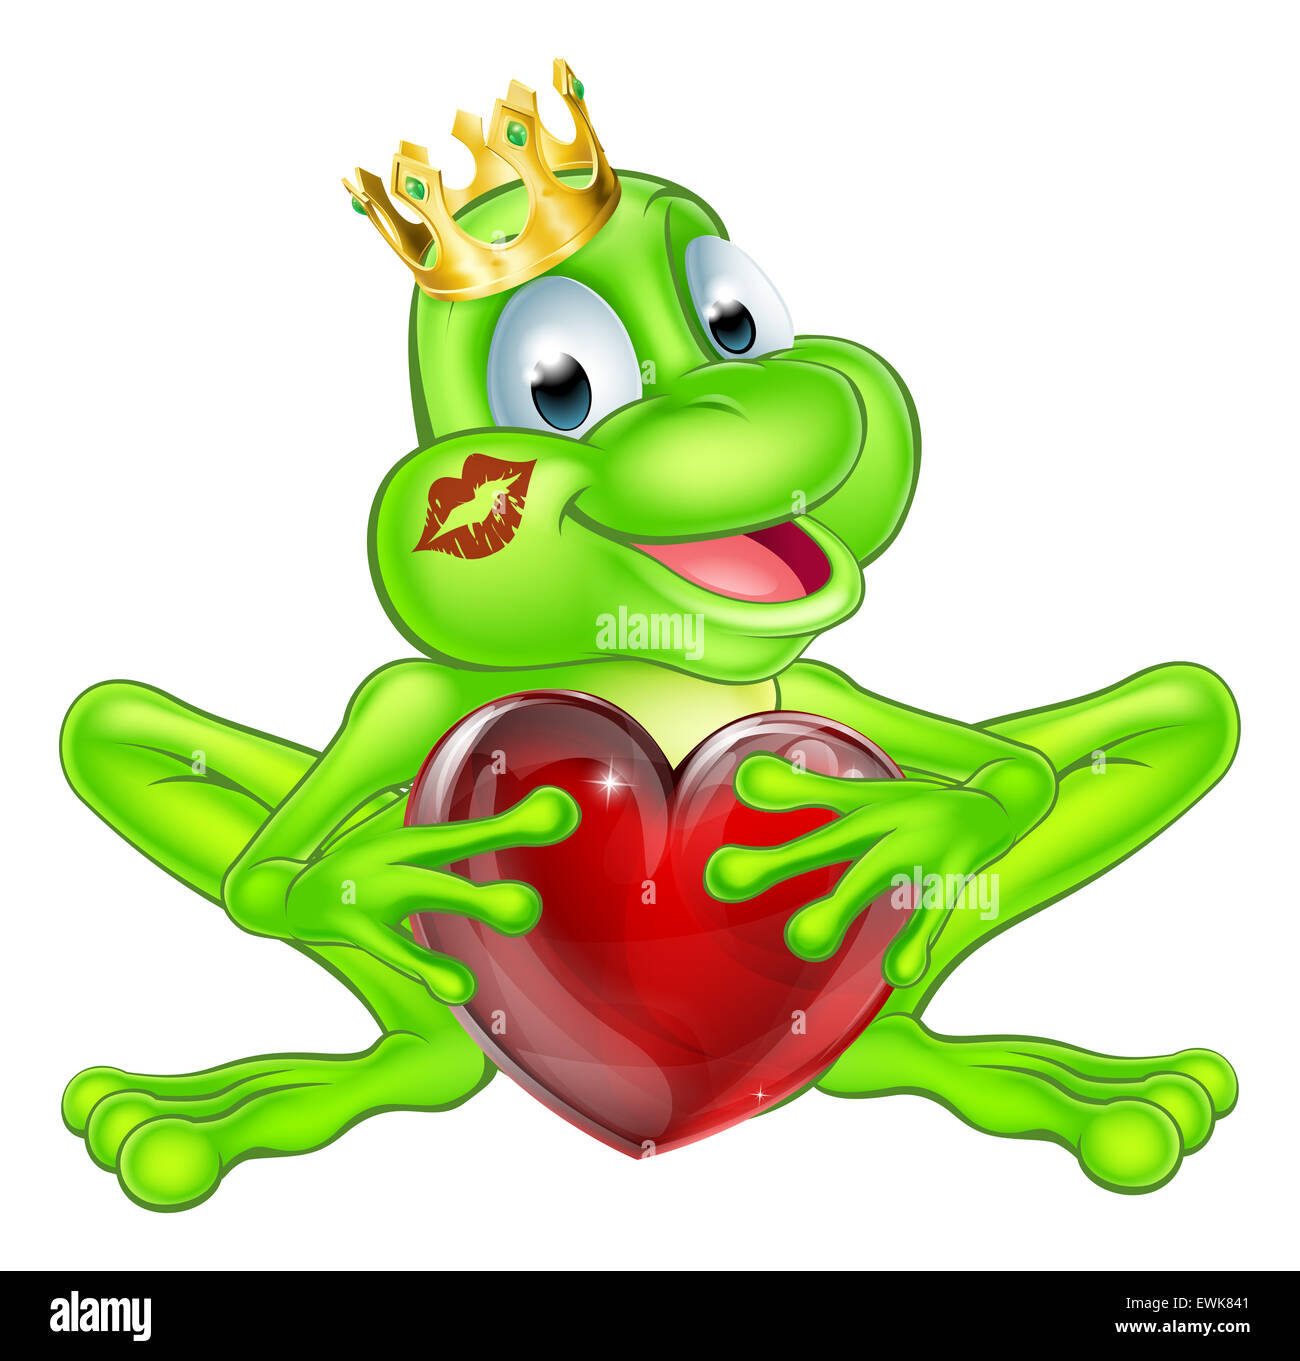 An illustration of a cute cartoon frog prince character wearing a crown holding a heart shape Stock Photo